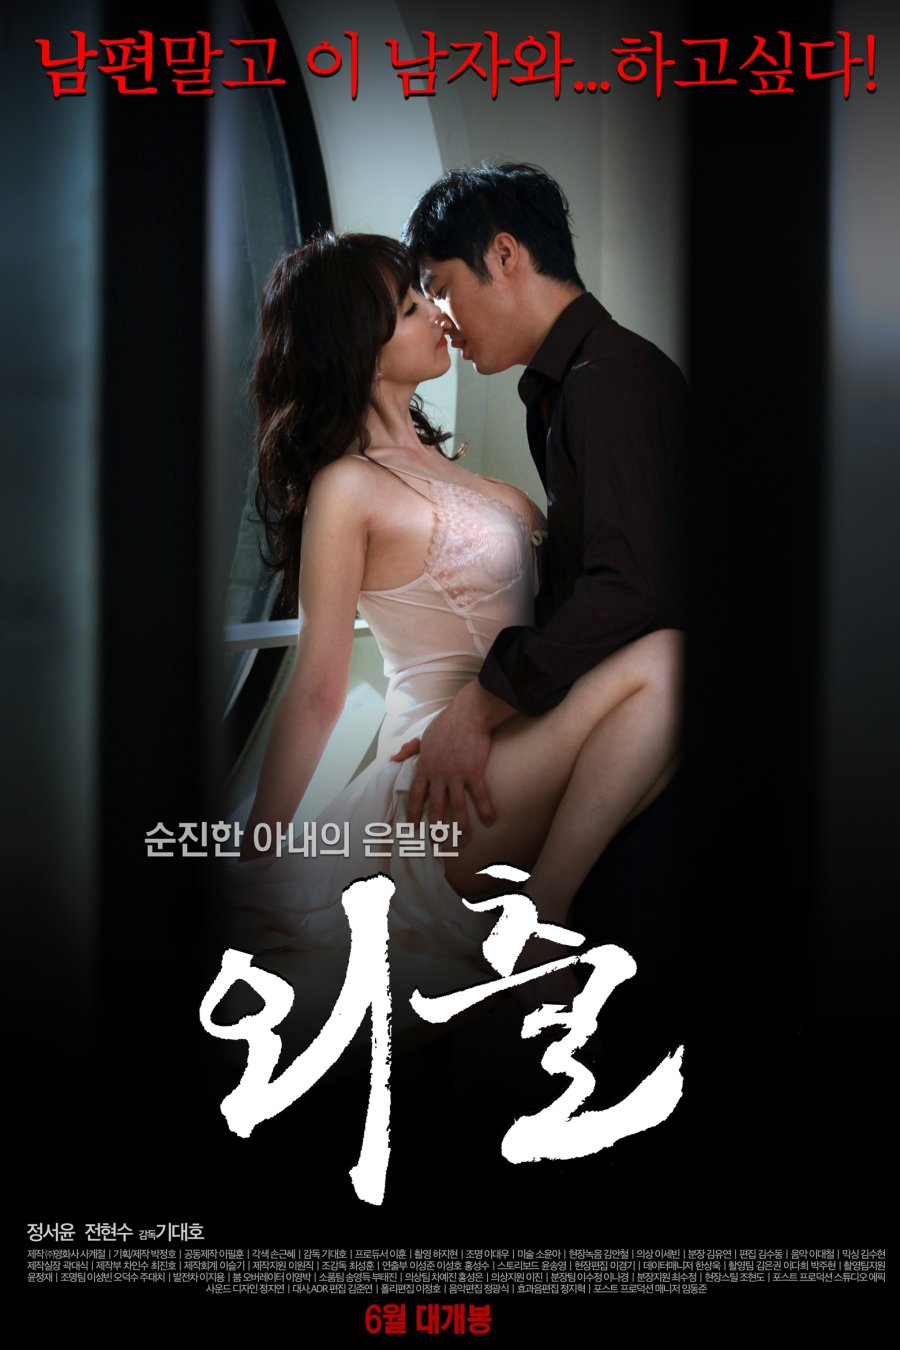 connie tanaka recommends korea hot movie 2015 list pic